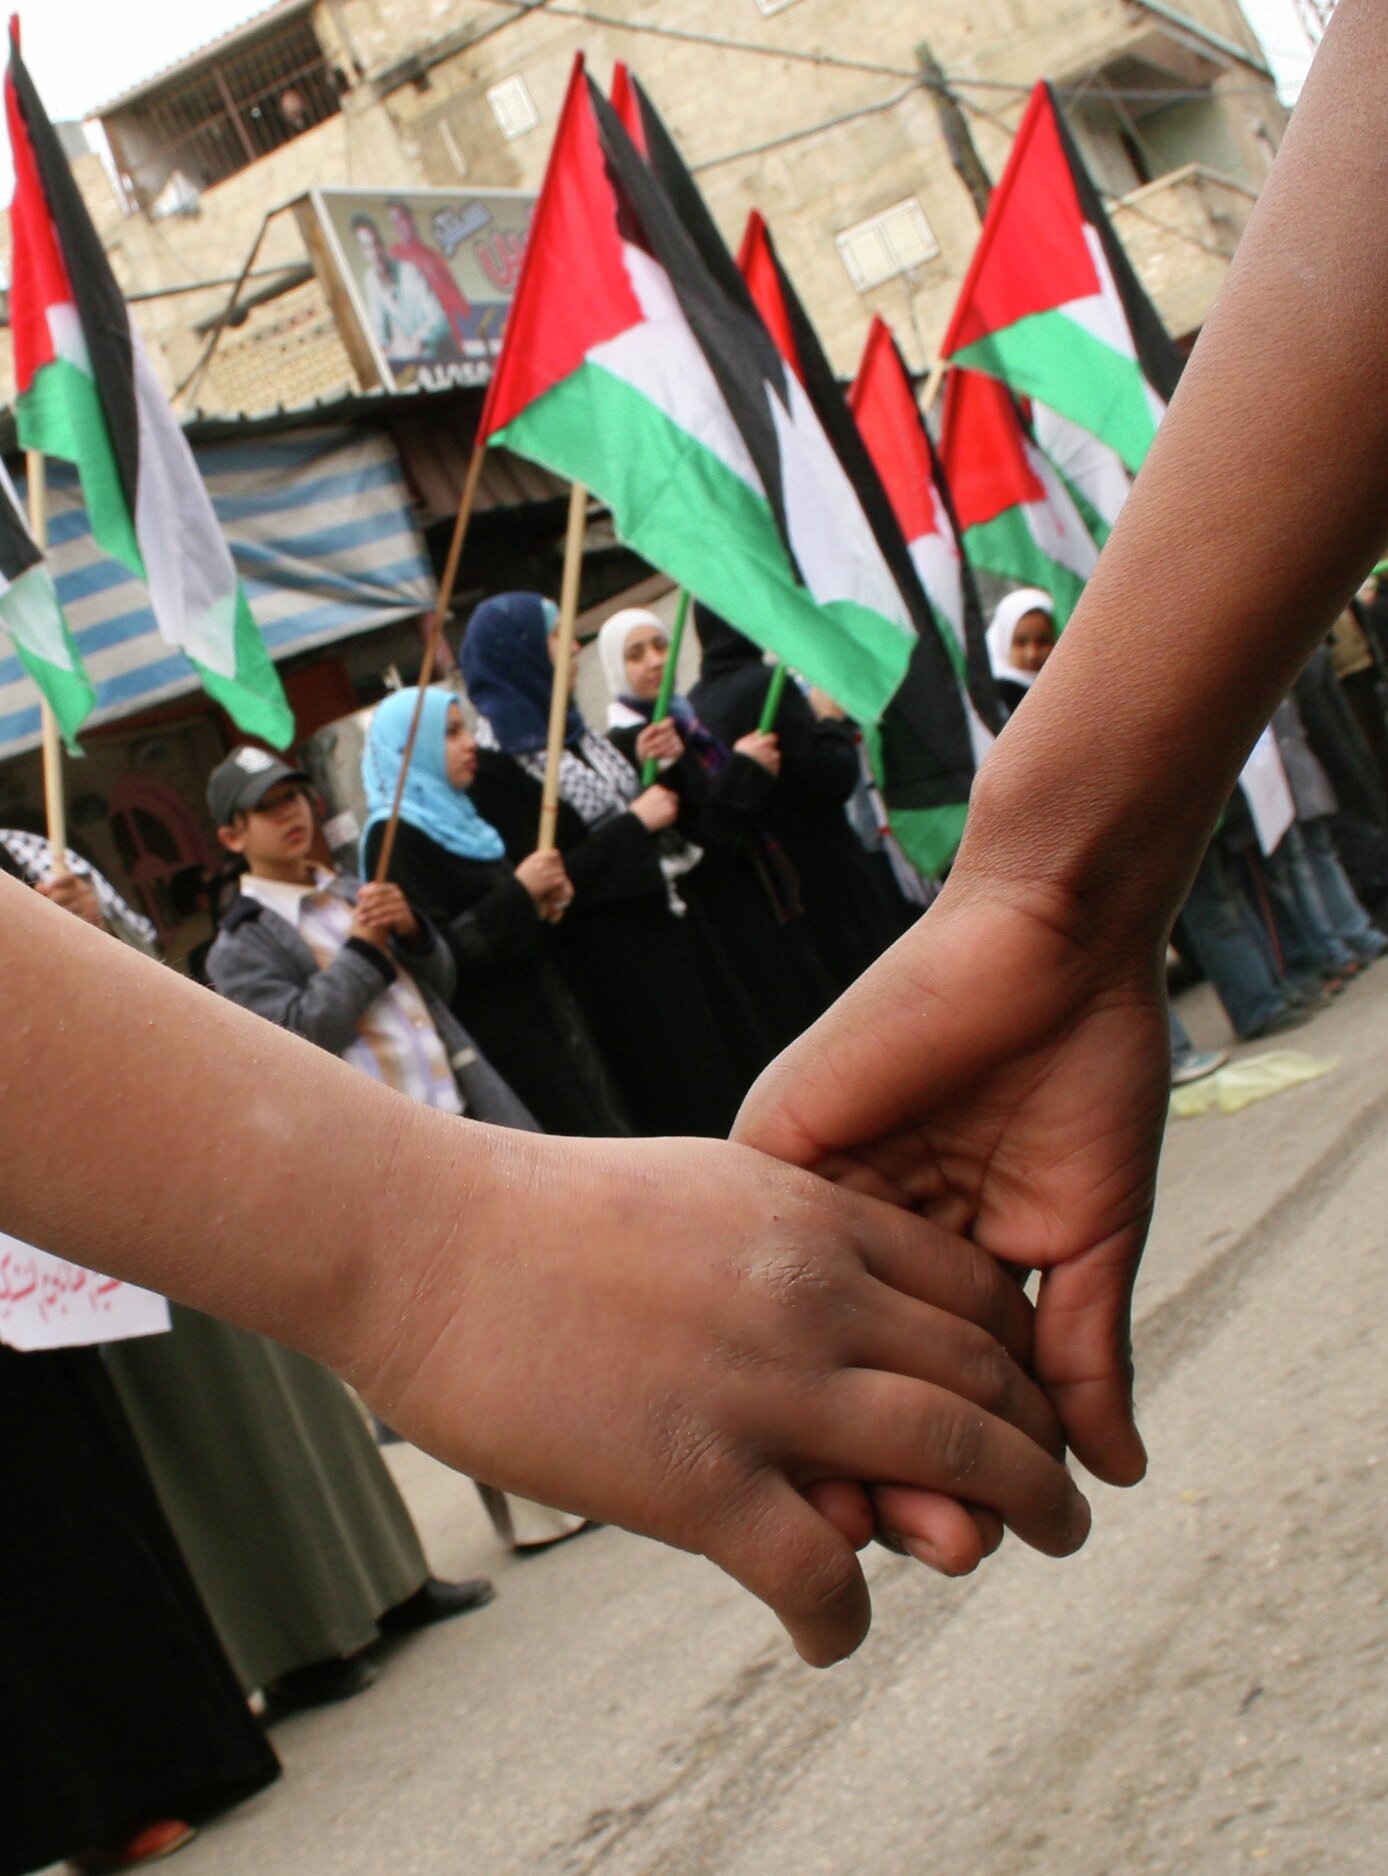 Picture is taken in March 2006. Holding hands in front of a line up with palestinian flags. Leier hverandre foran oppstilte palestinske flagg